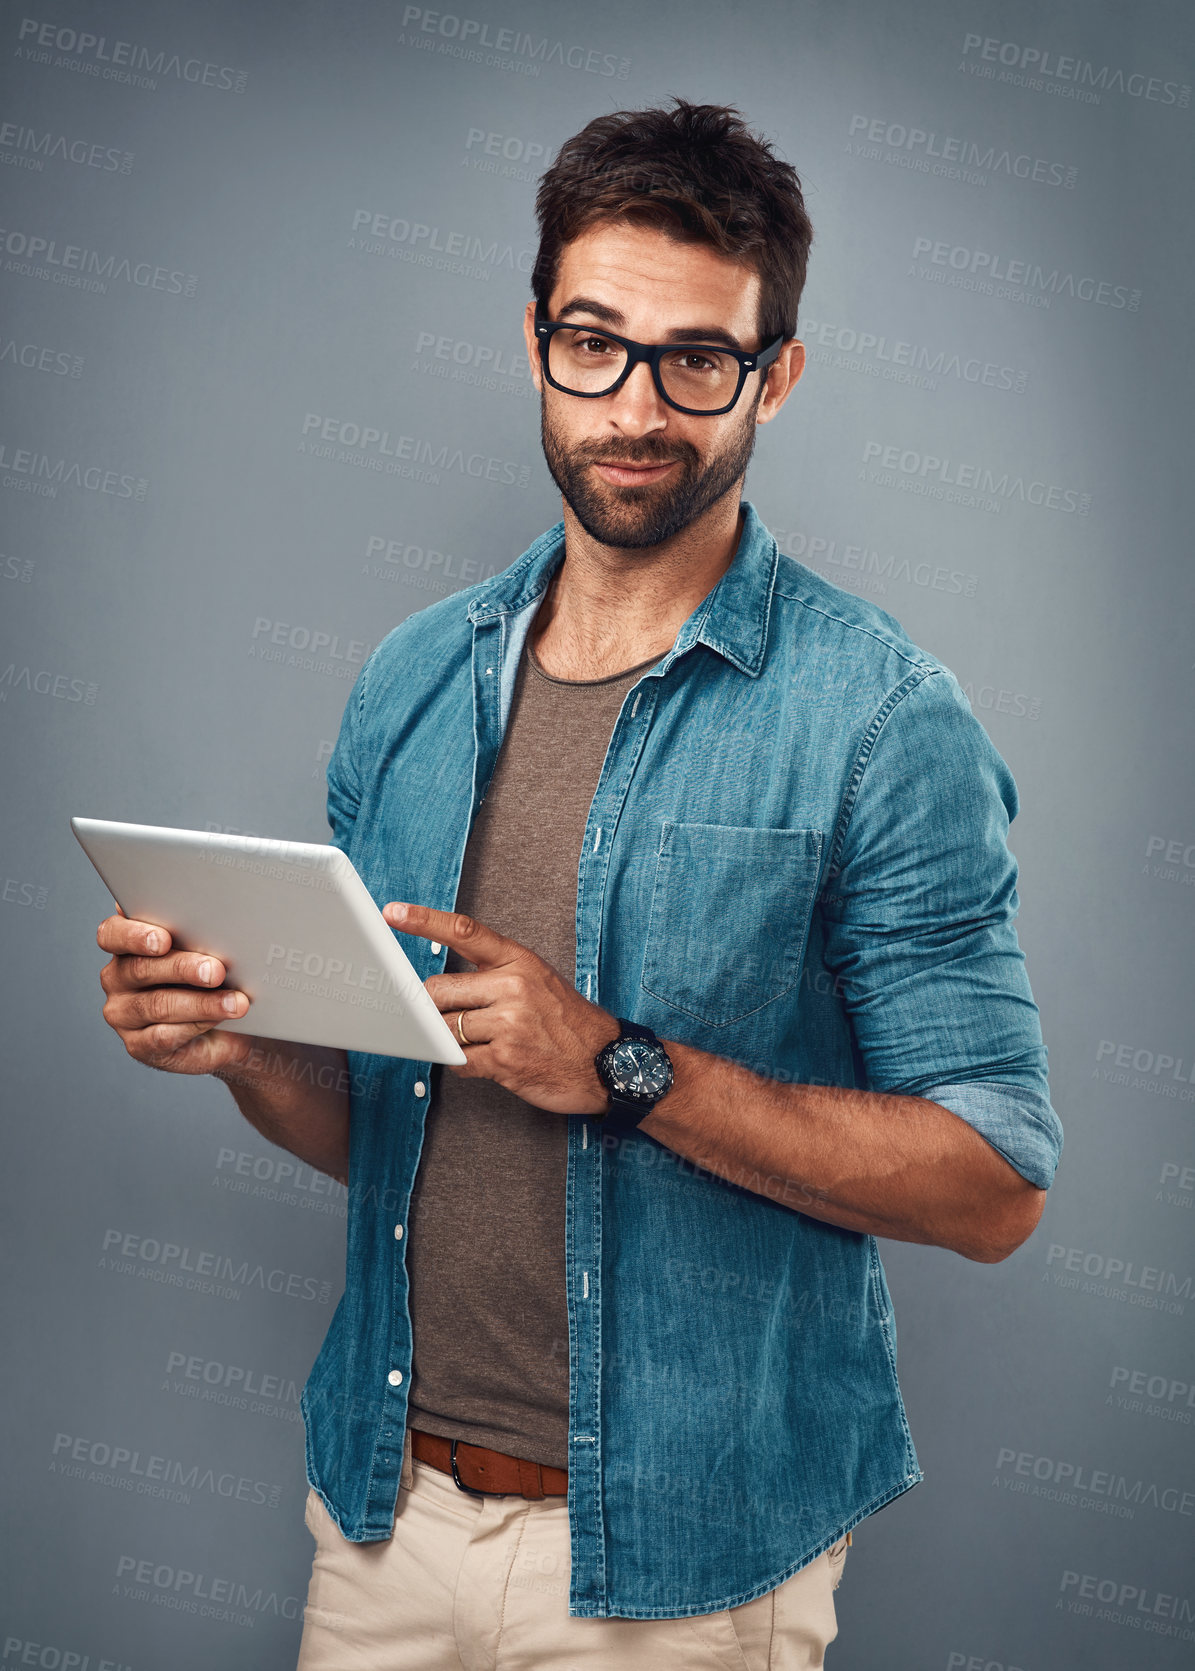 Buy stock photo Studio shot of a handsome young man using a digital tablet against a grey background